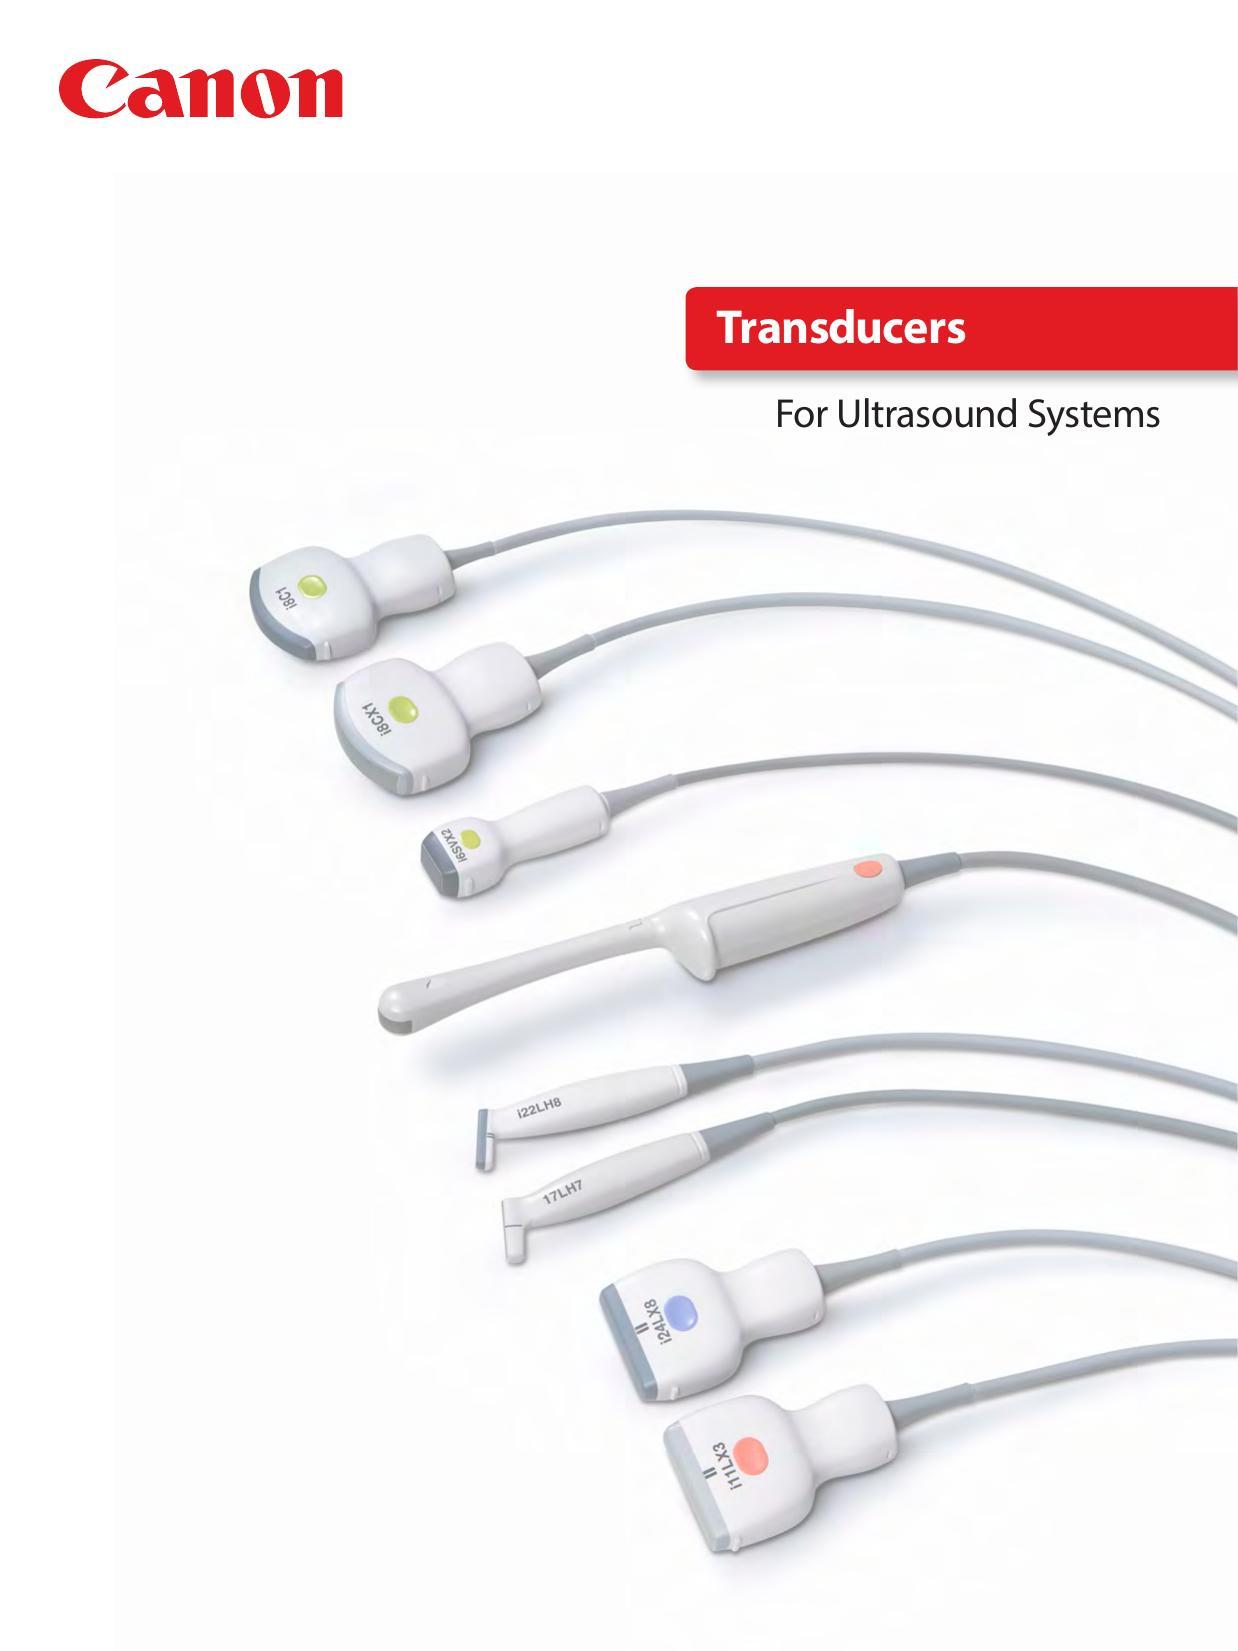 canon-transducers-for-ultrasound-systems-user-manual.pdf